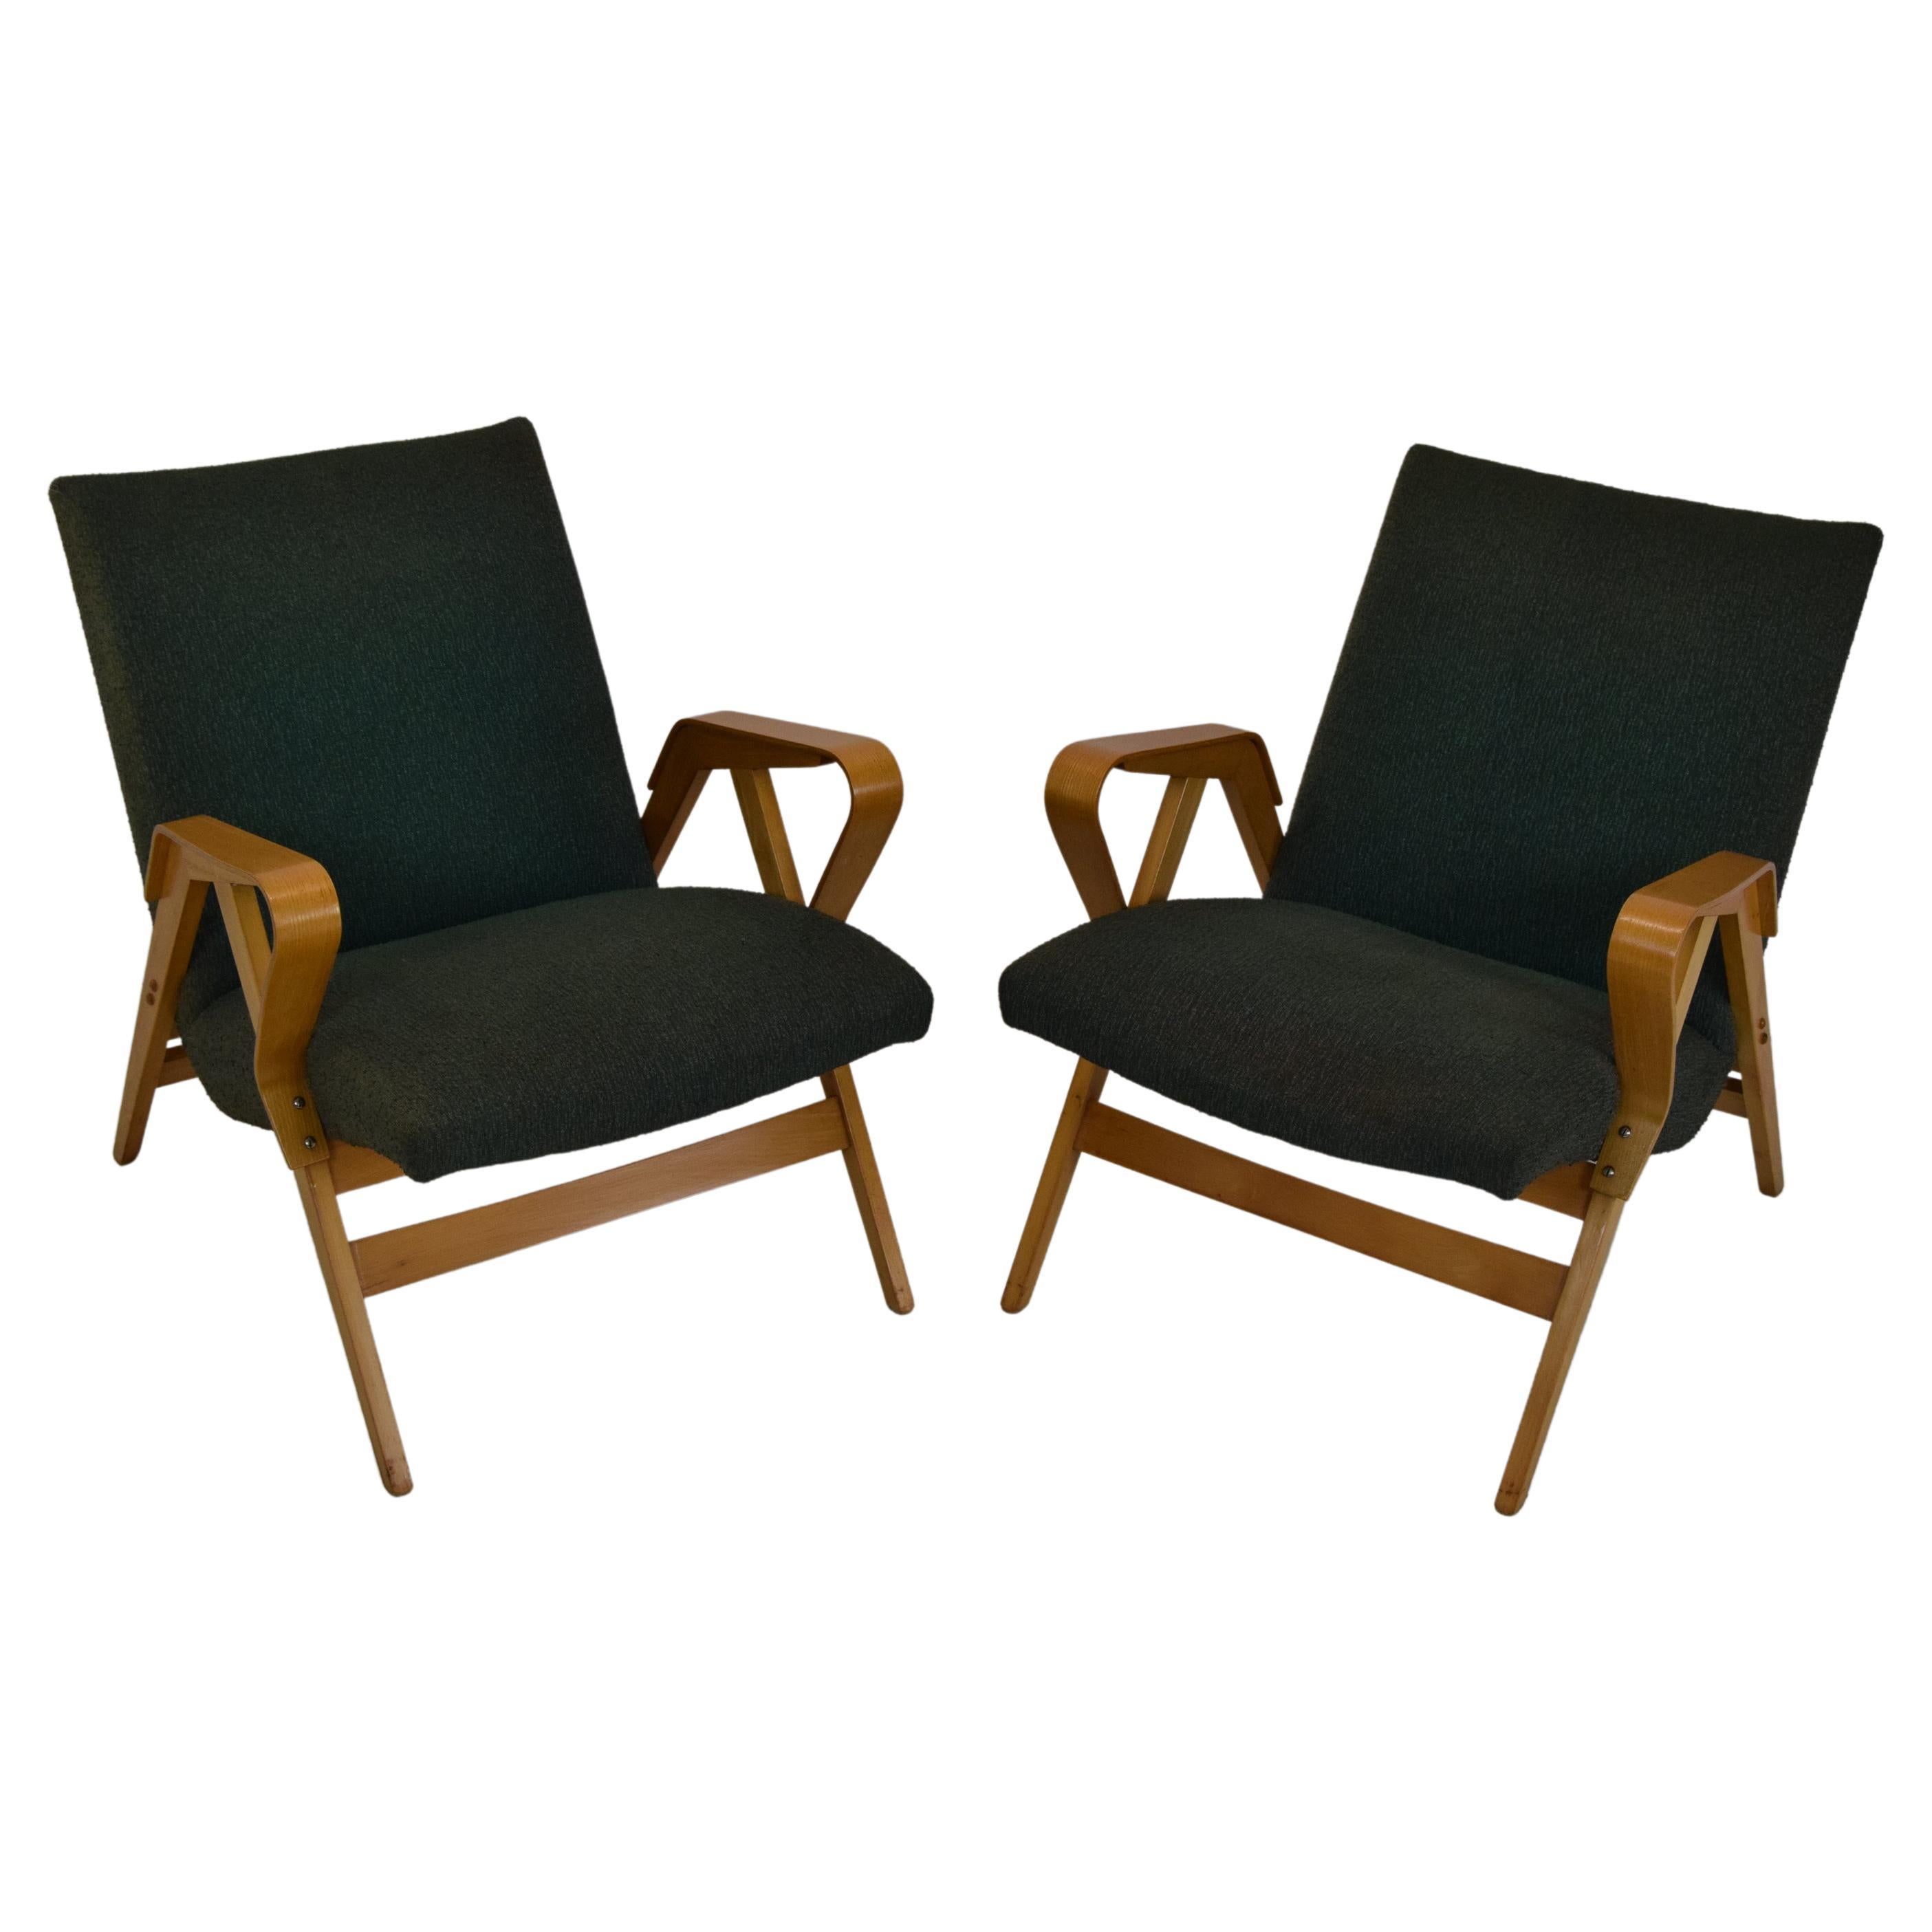 Made in Czechoslovakia
Made of Fabric,Ash Wood
Fabric is suitable for reupholstery 
Good original condition